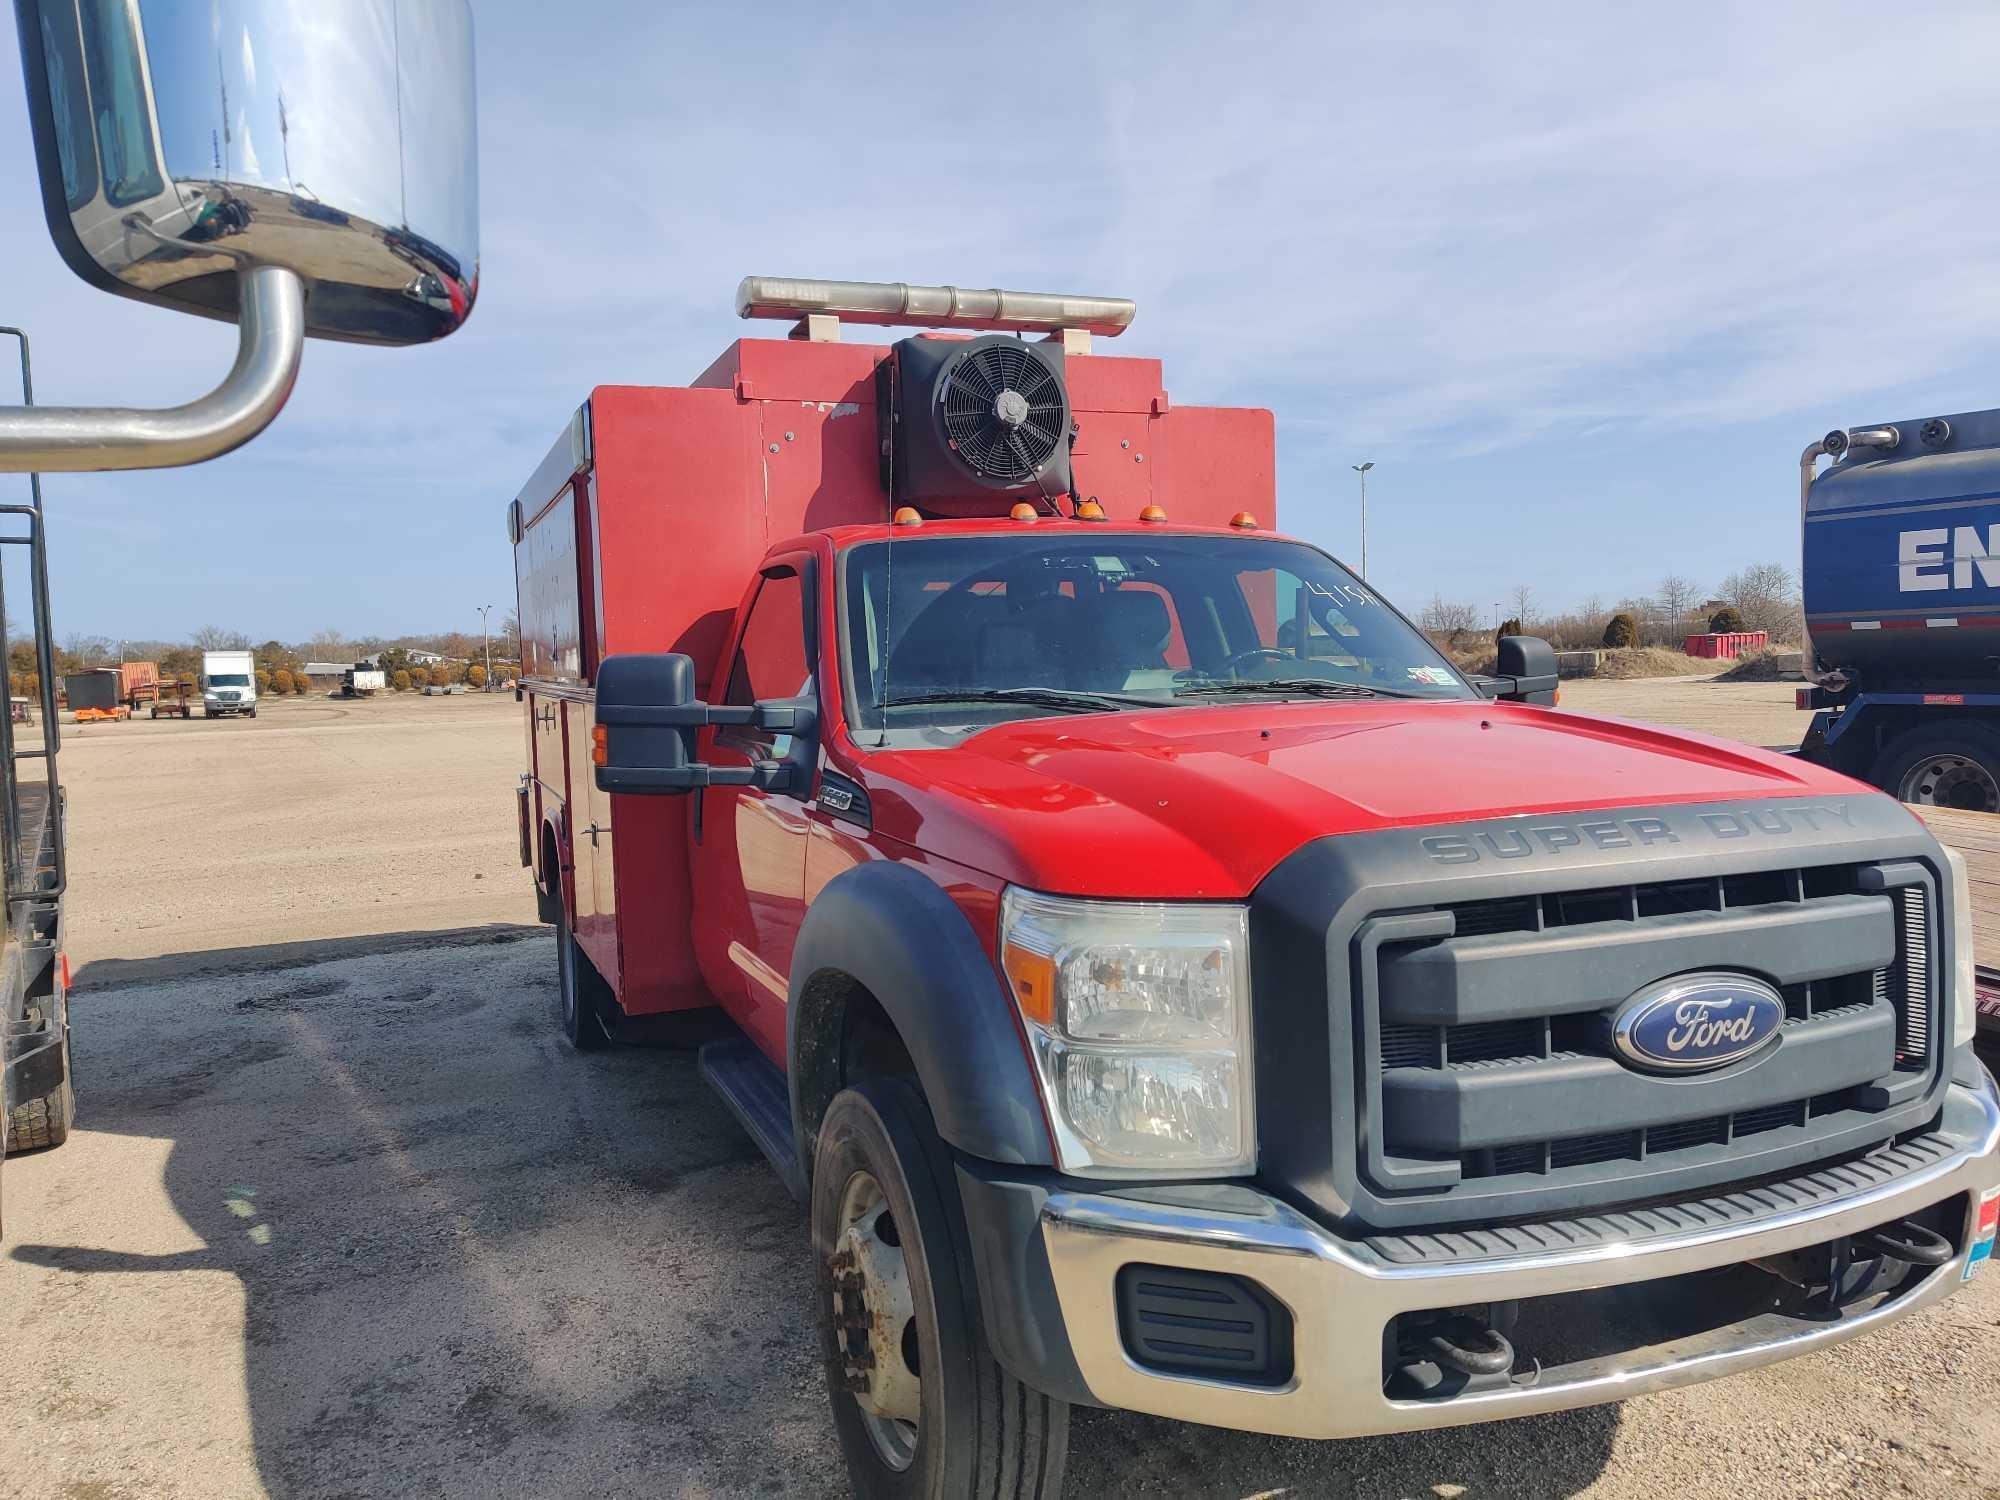 2012 FORD F550 SERVICE TRUCK VN:1FDUF5GT1CEB93114 powered by diesel engine, equipped with automatic